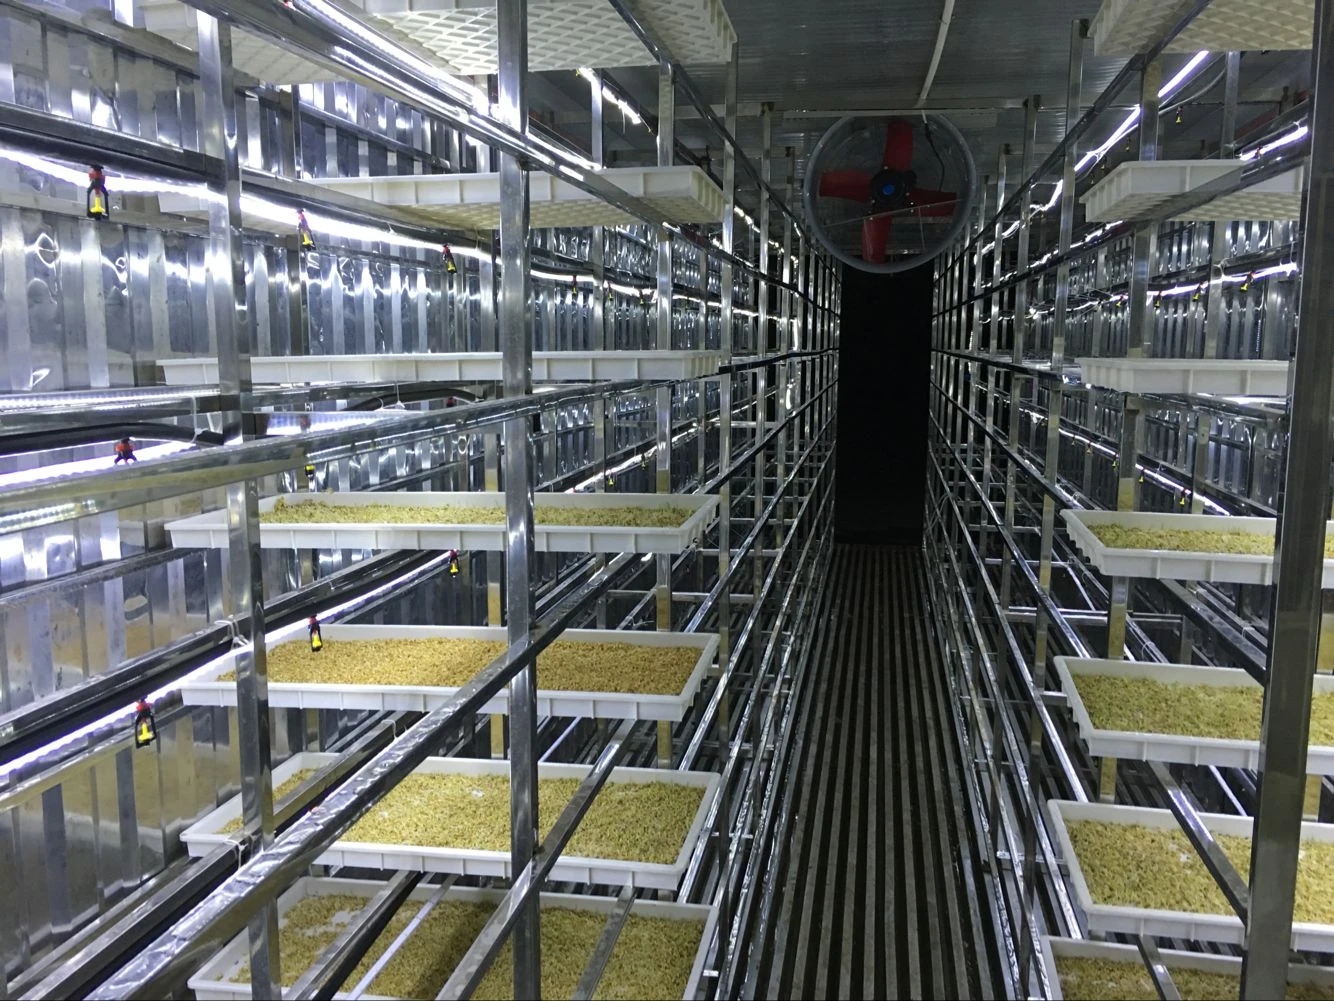 20GP container barley breeding rooms for planting green fodder